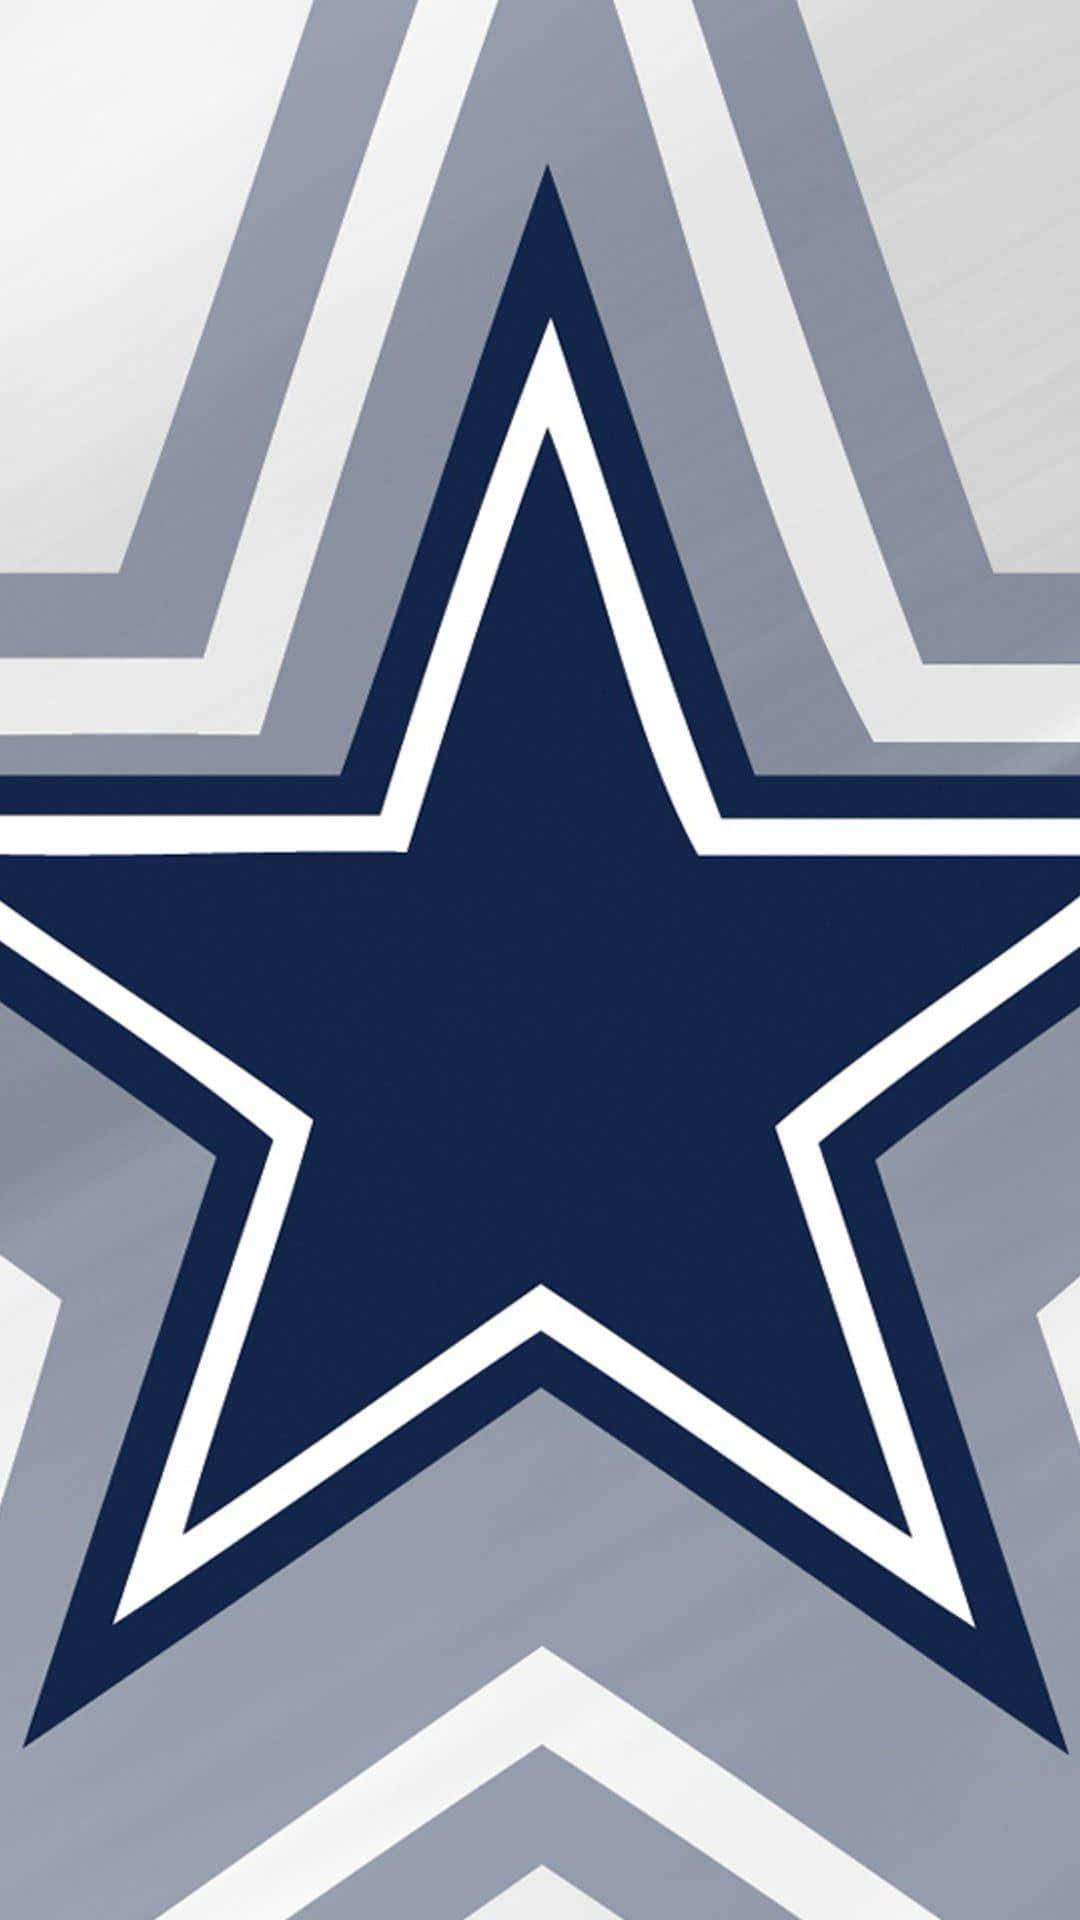 "The Hard Work of Cowboys Pays Off in the End" Wallpaper